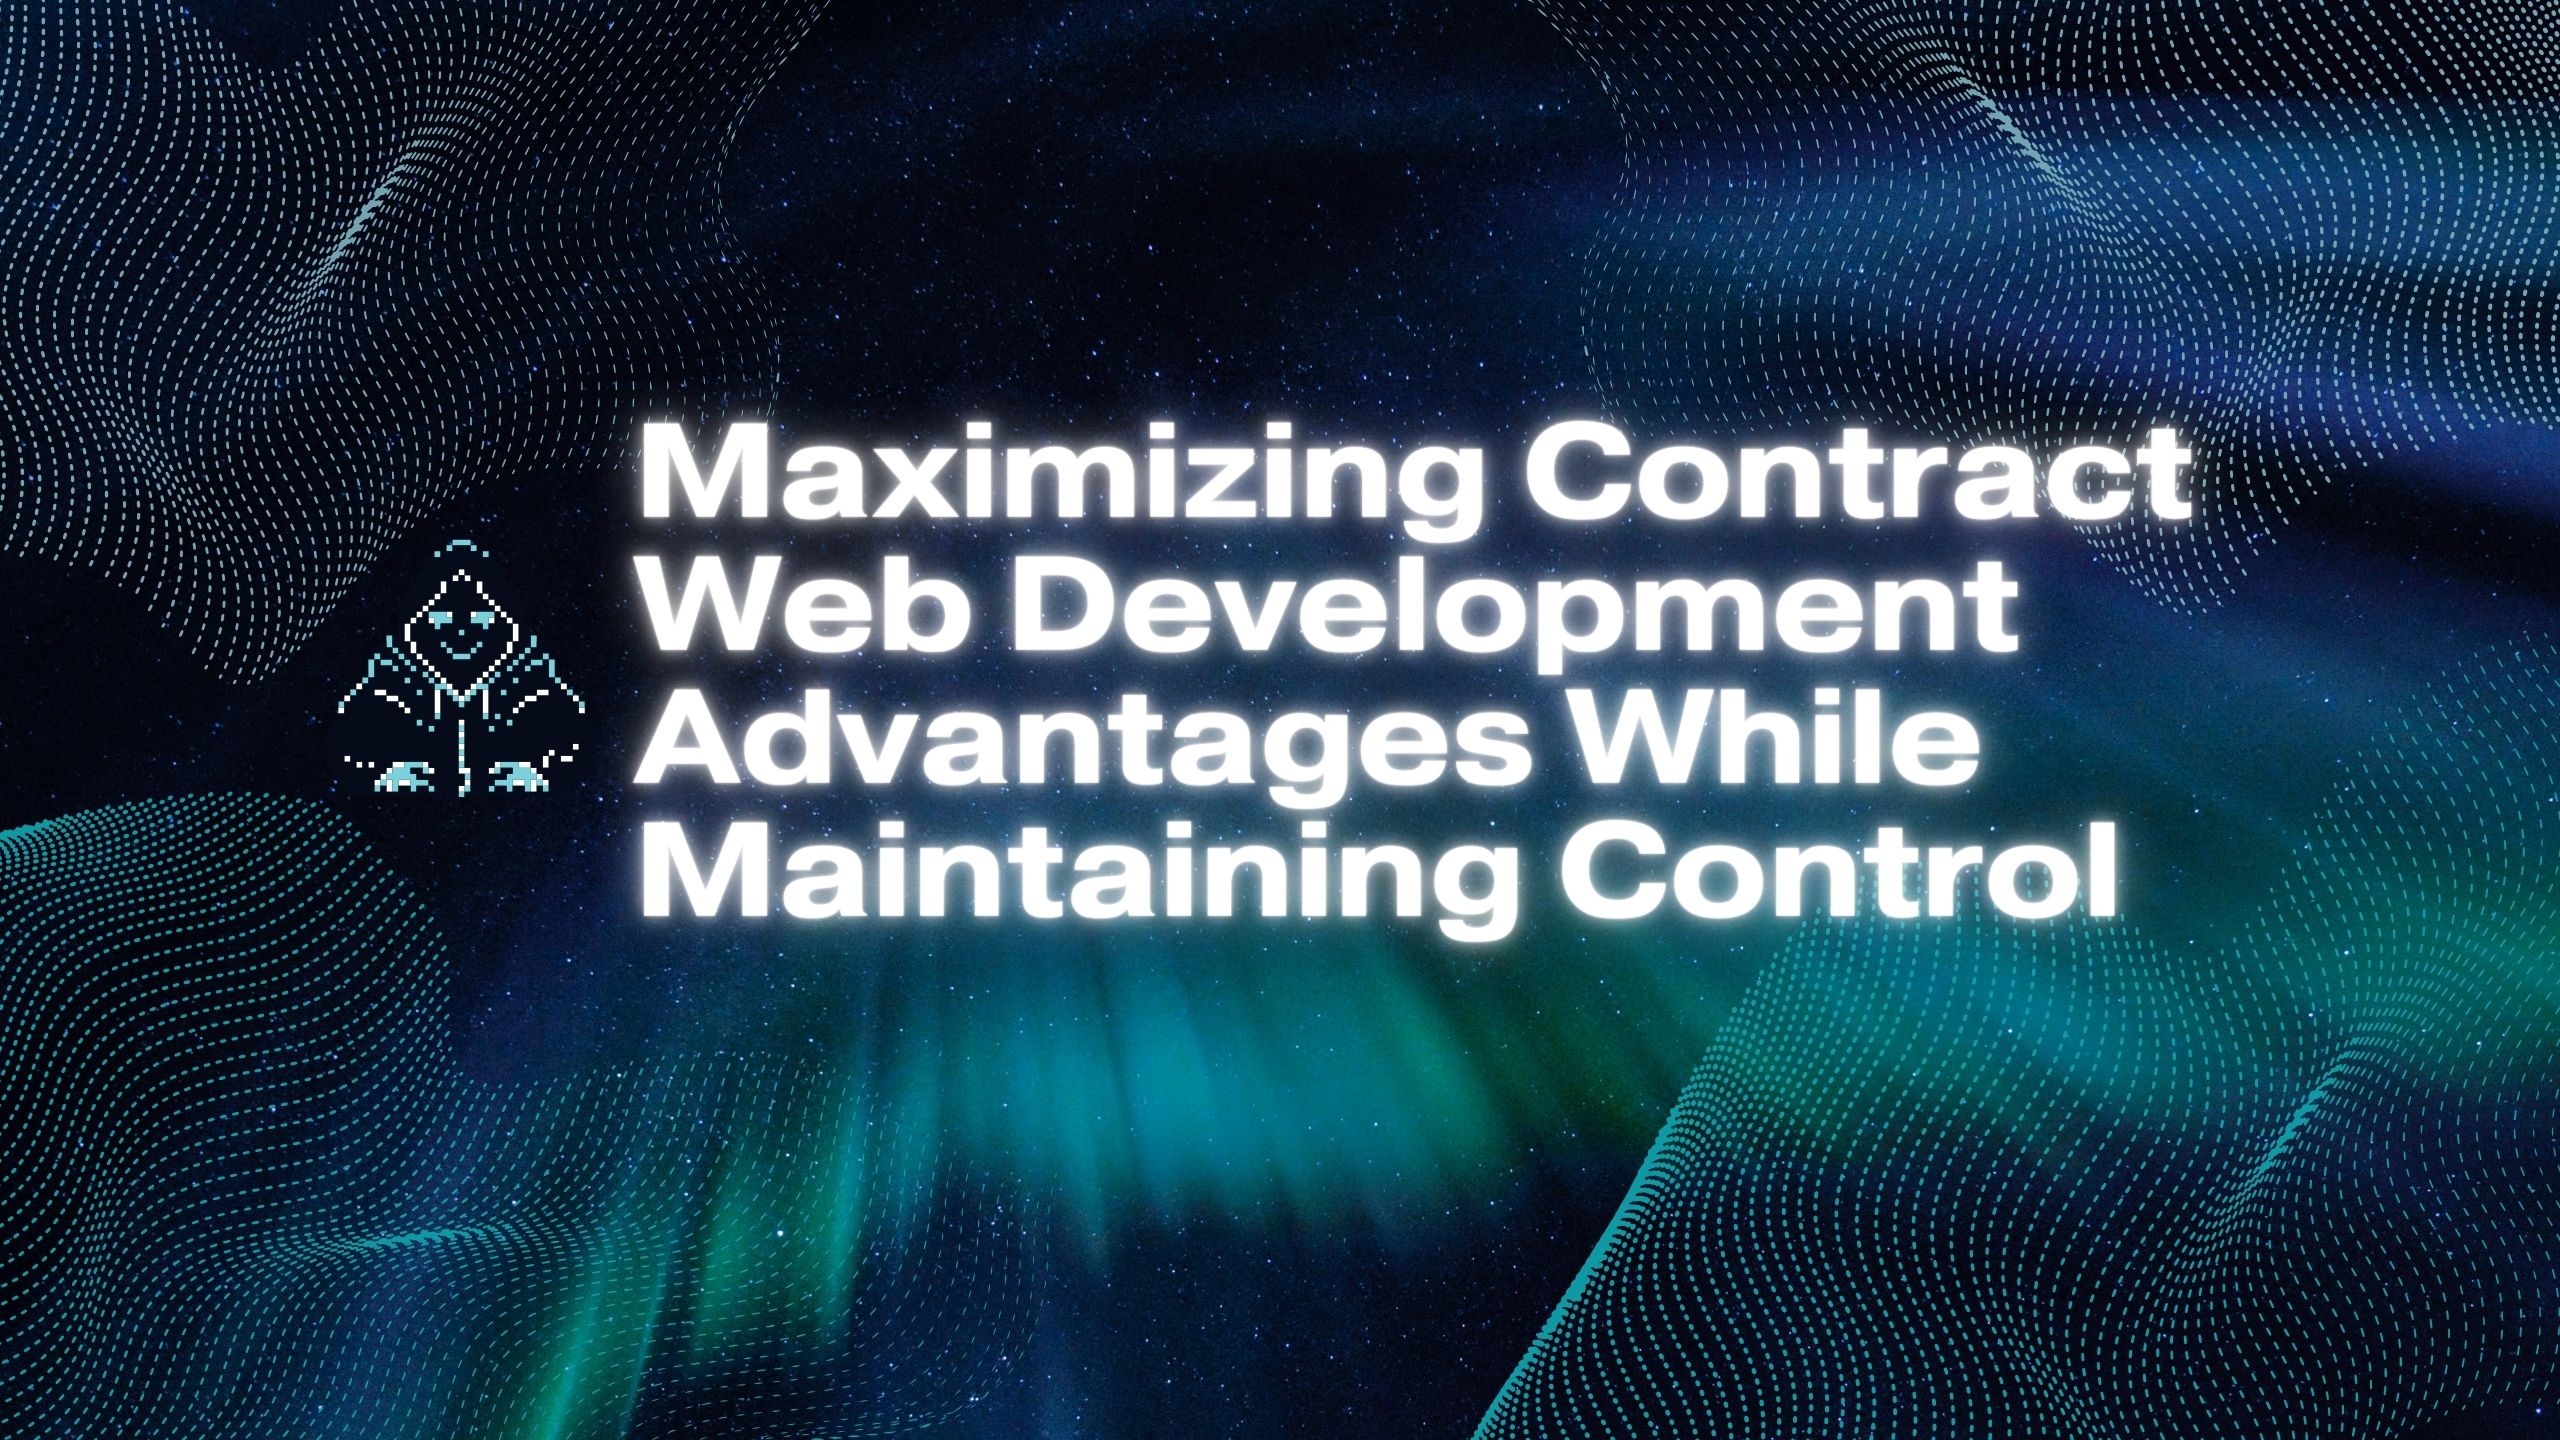 Maximizing Contract Web Development Advantages While Maintaining Control